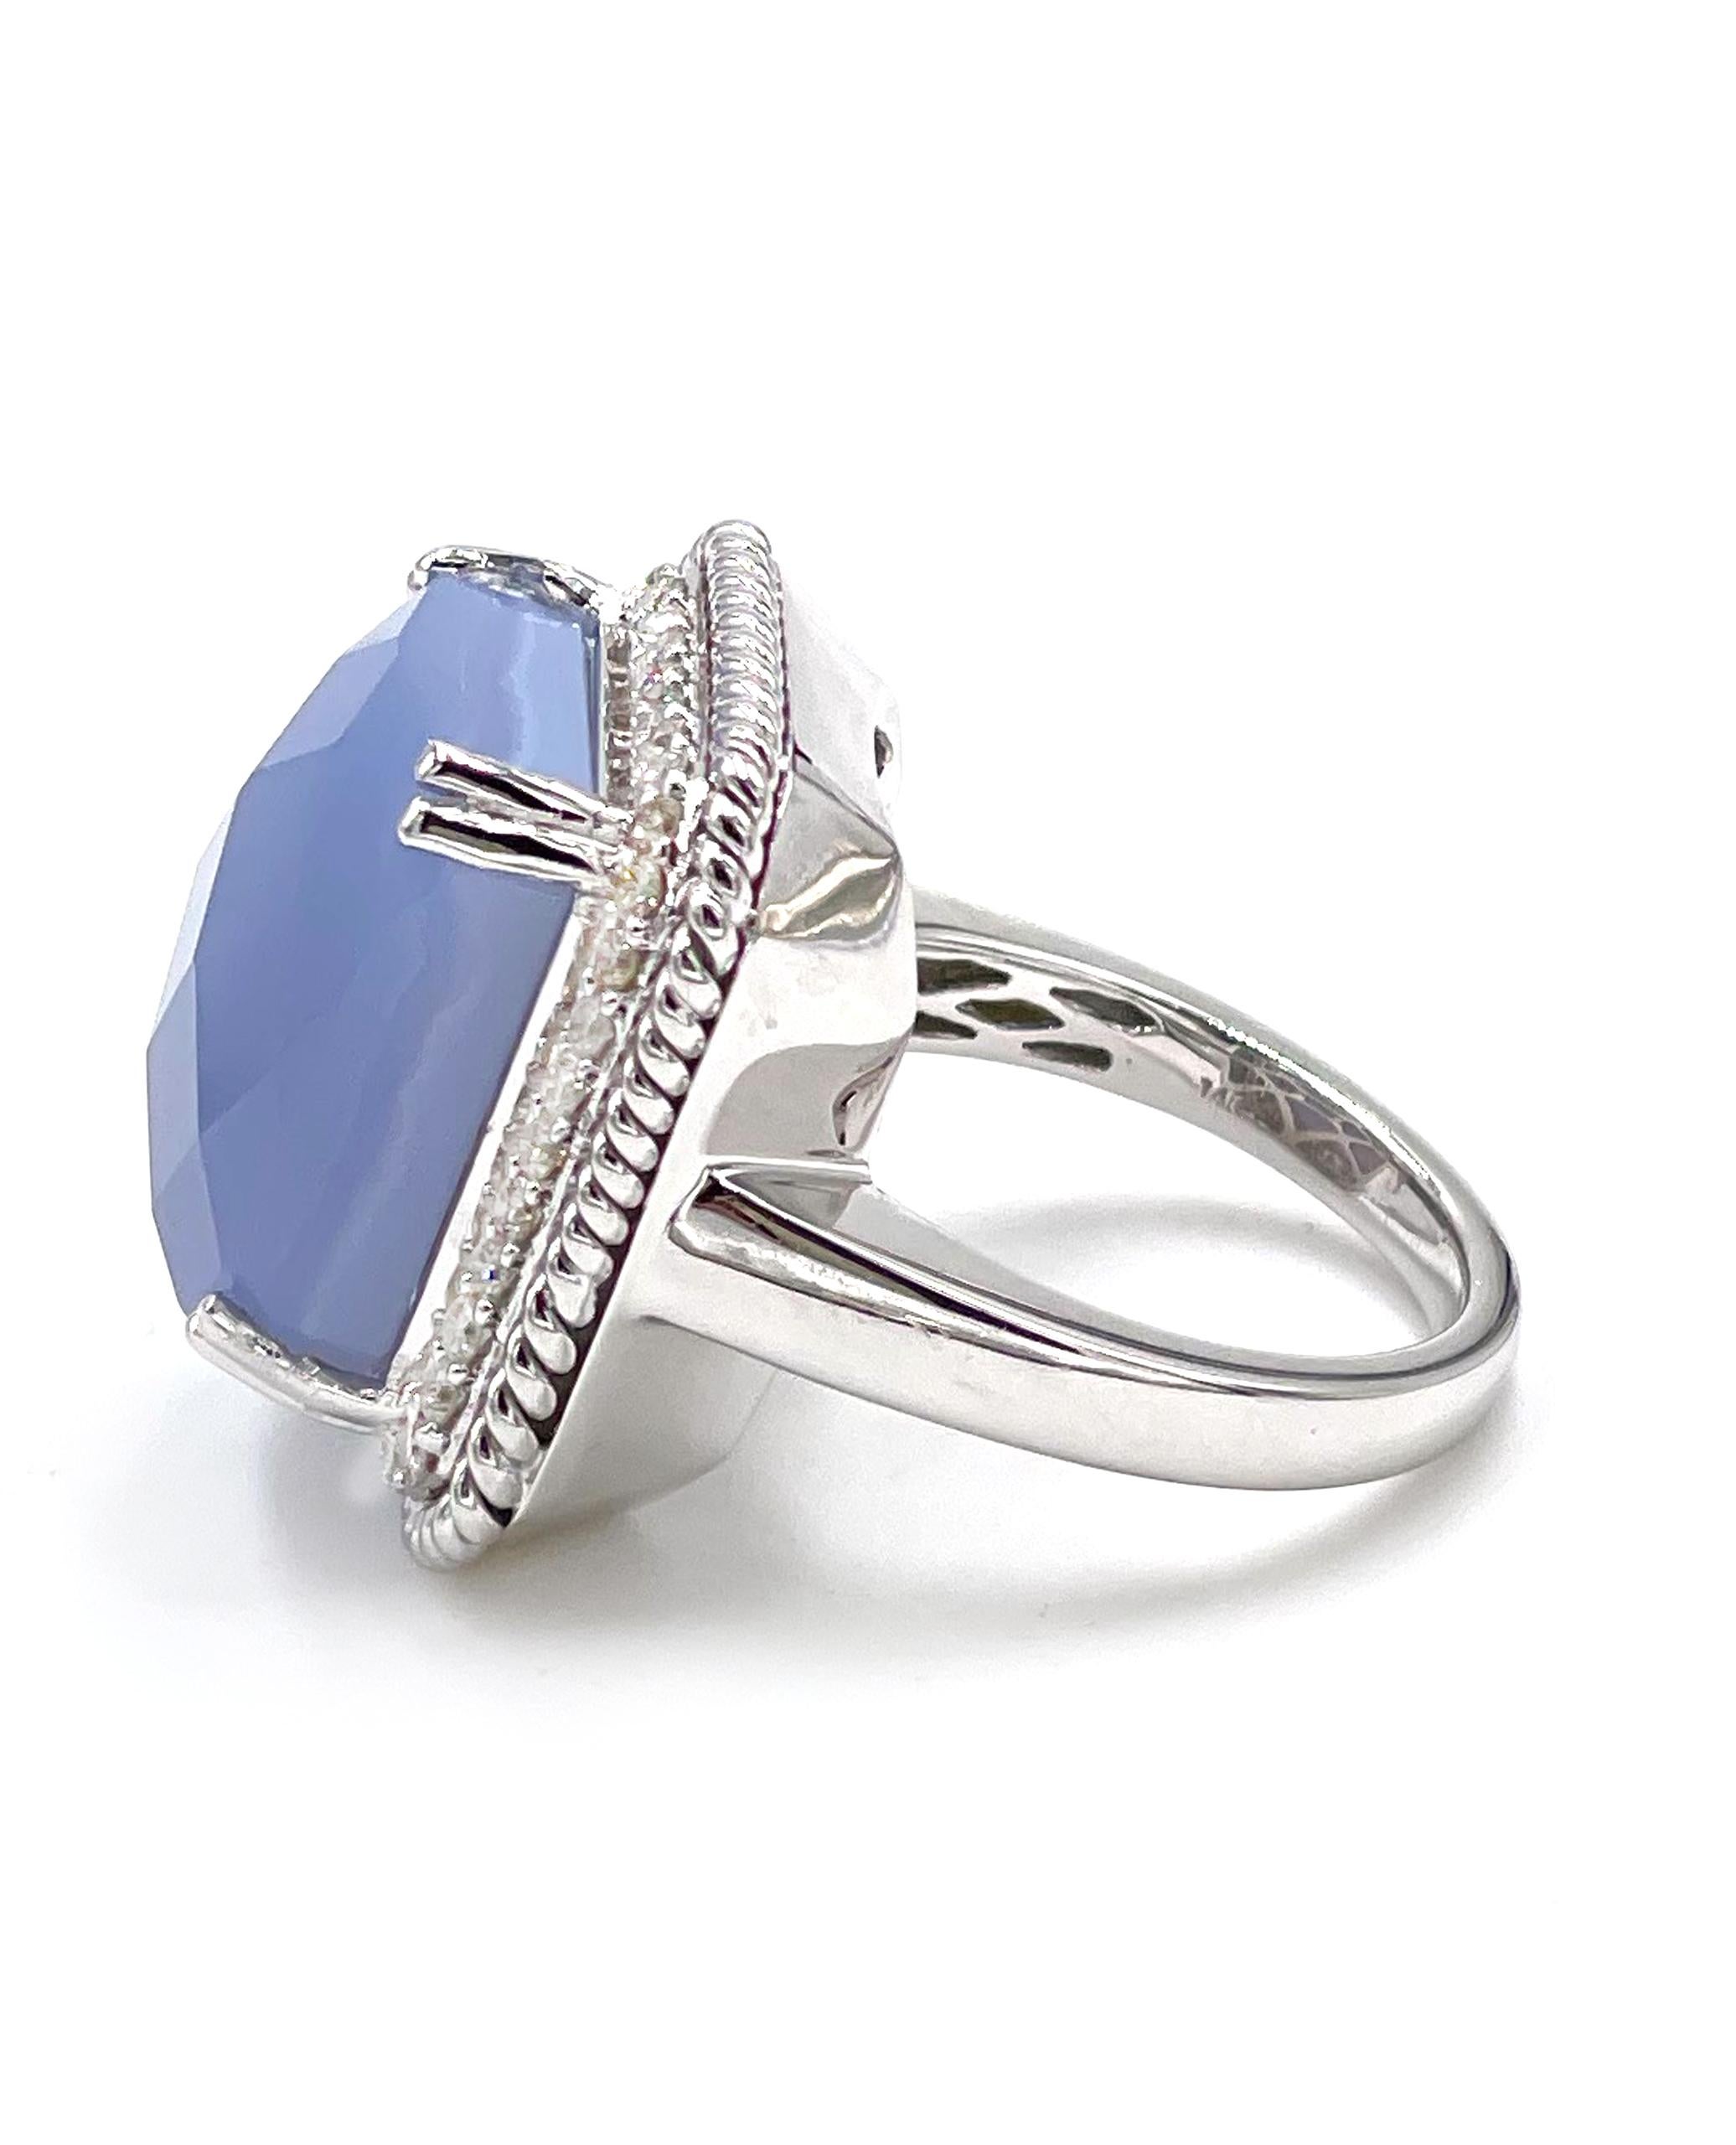 Contemporary 14K White Gold Right Hand Ring with Diamonds and Chalcedony For Sale